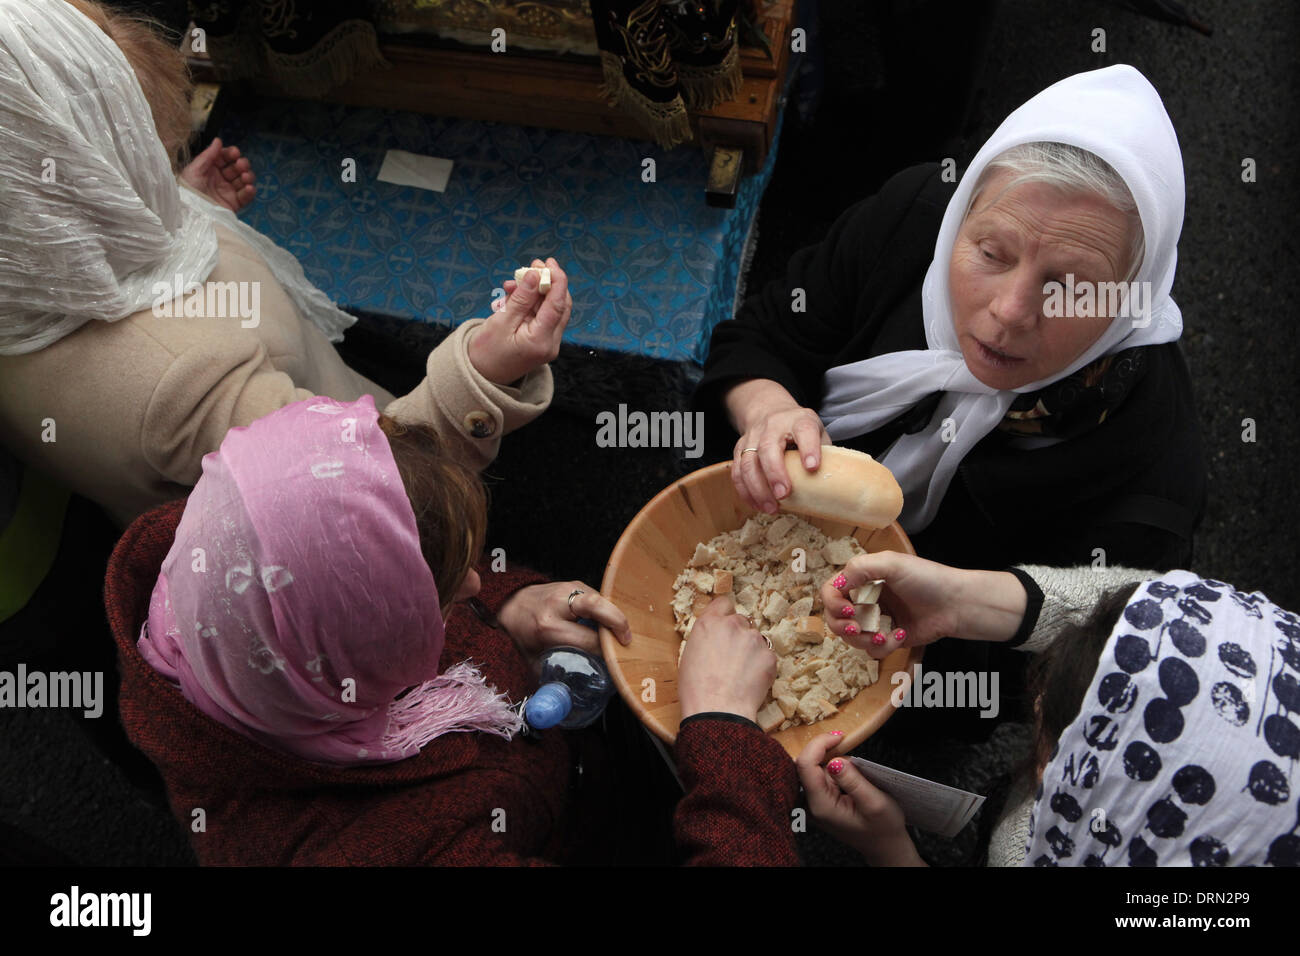 Orthodox believers take the lambs, square portions of bread cut from the prosphora. Stock Photo